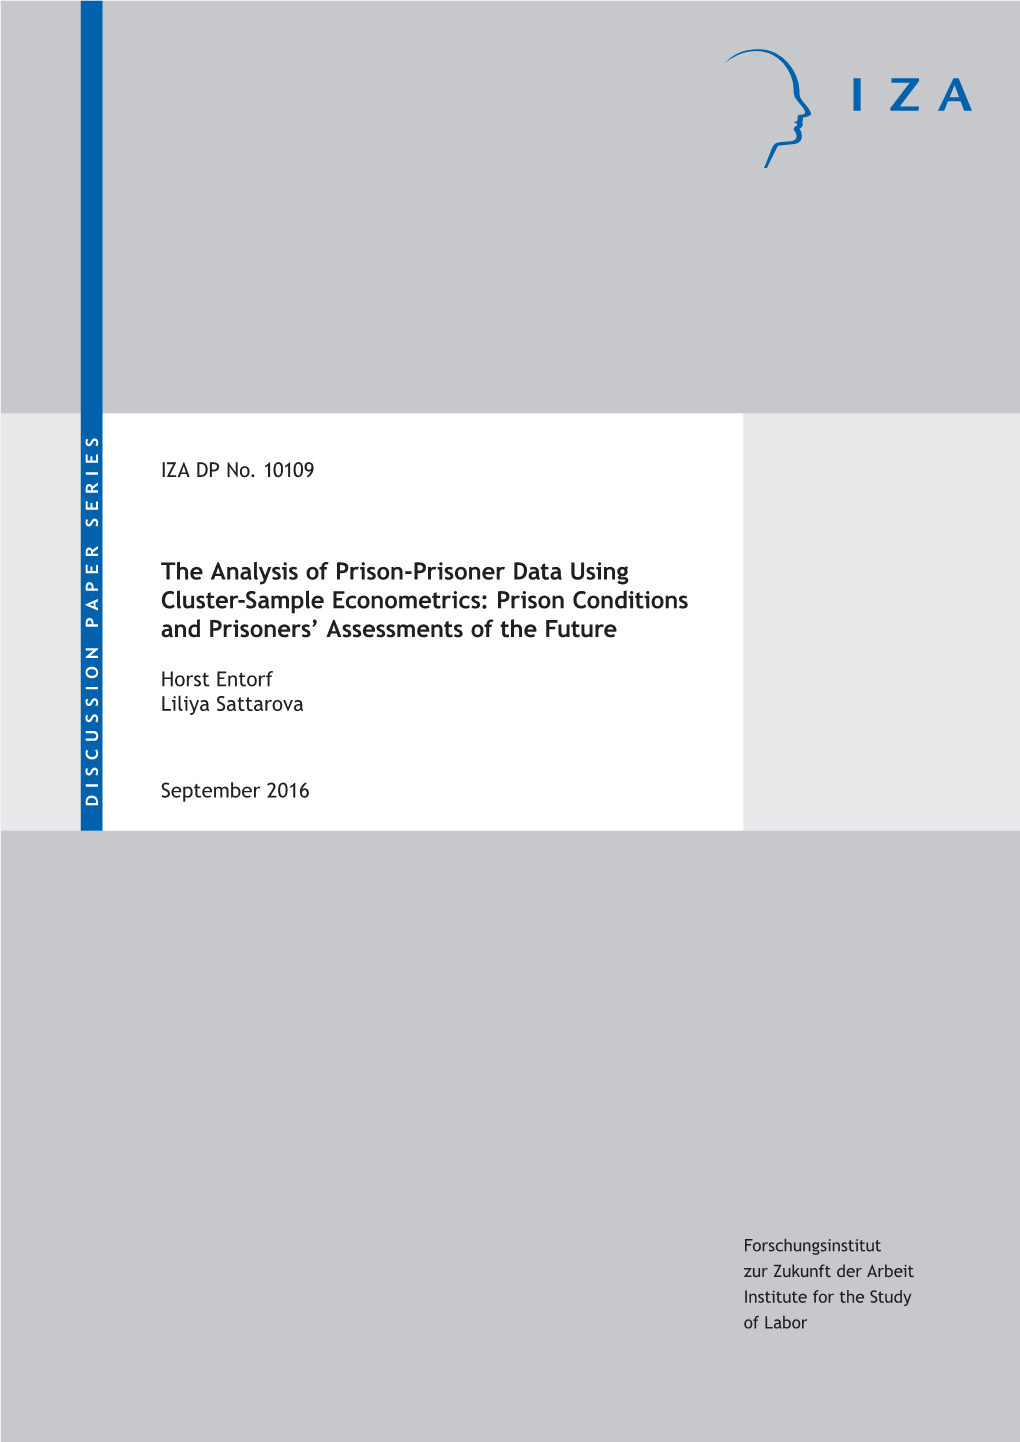 The Analysis of Prison-Prisoner Data Using Cluster-Sample Econometrics: Prison Conditions and Prisoners’ Assessments of the Future